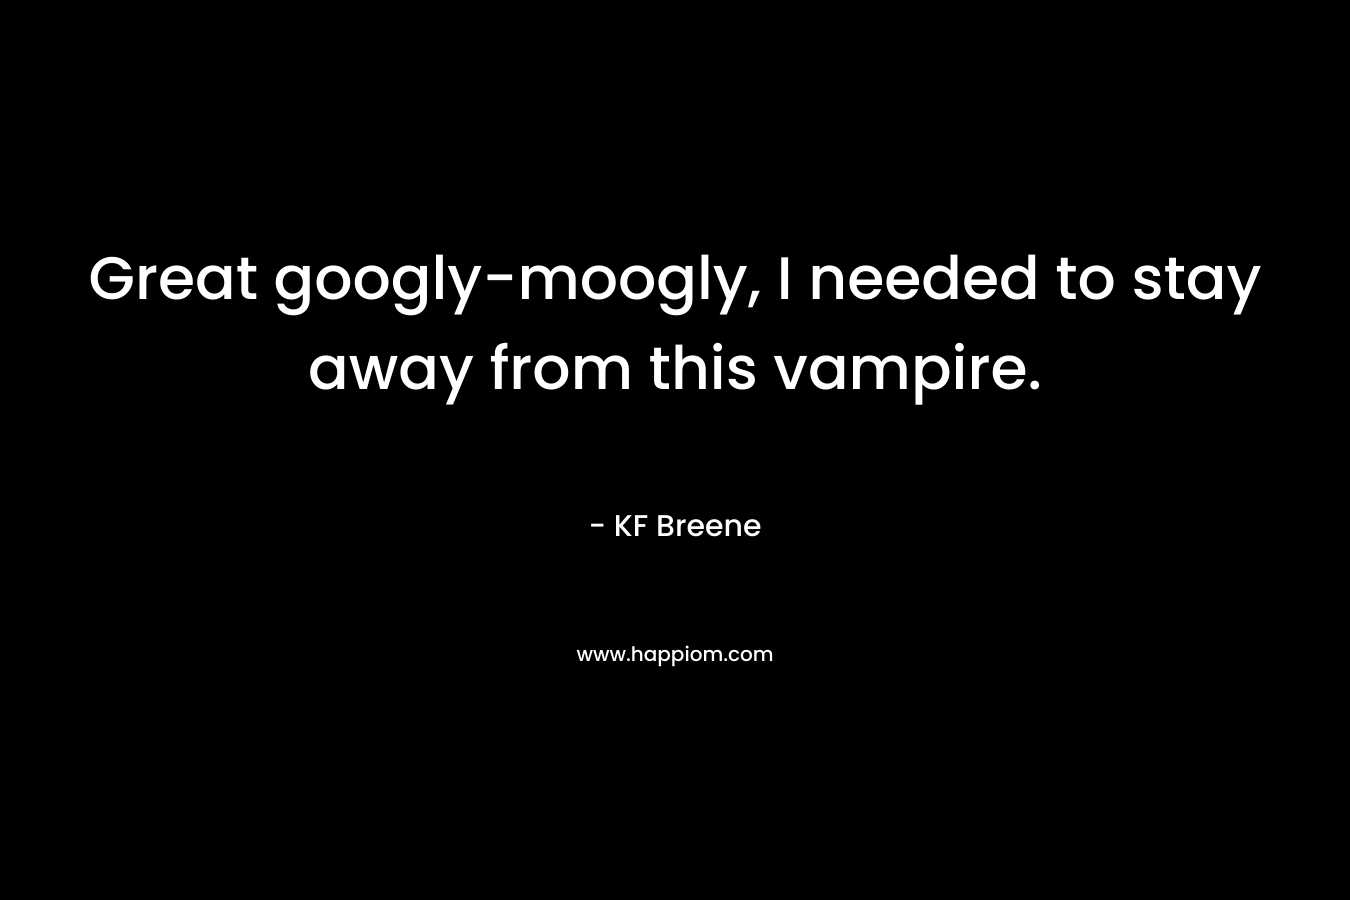 Great googly-moogly, I needed to stay away from this vampire.